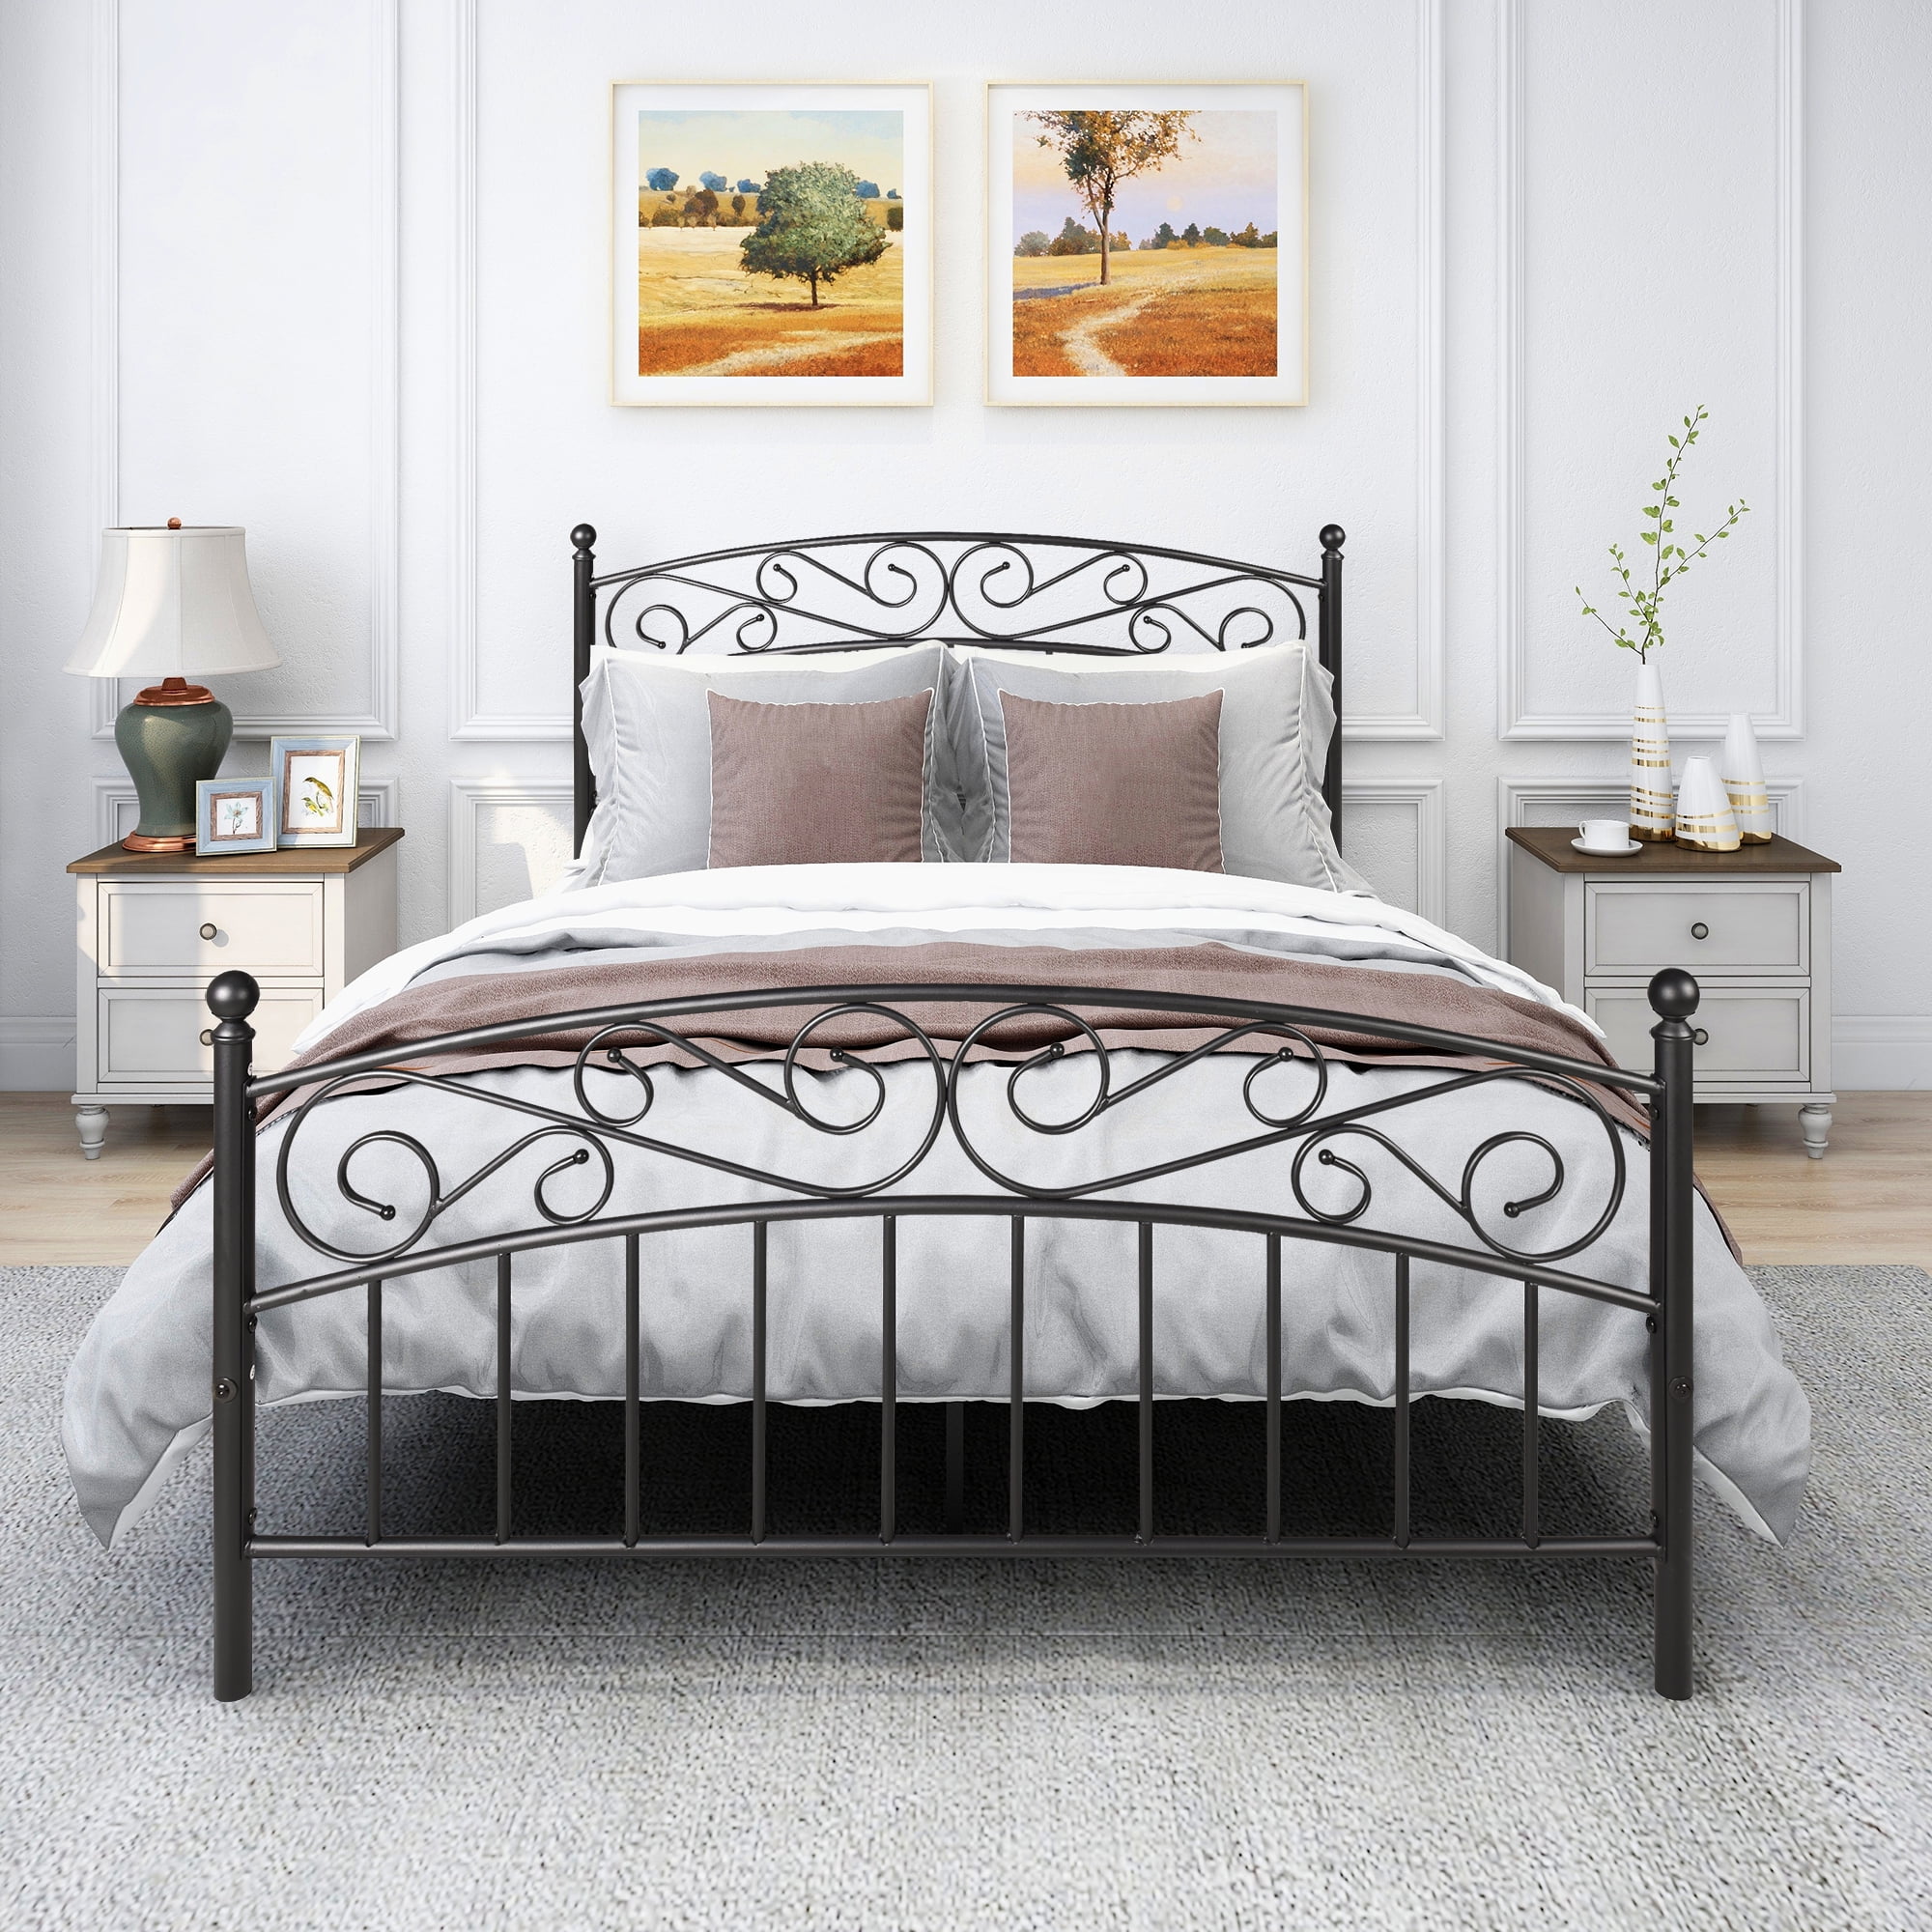 Metal Bed Frame Queen Size With Vintage, Wrought Iron King Bed Headboard